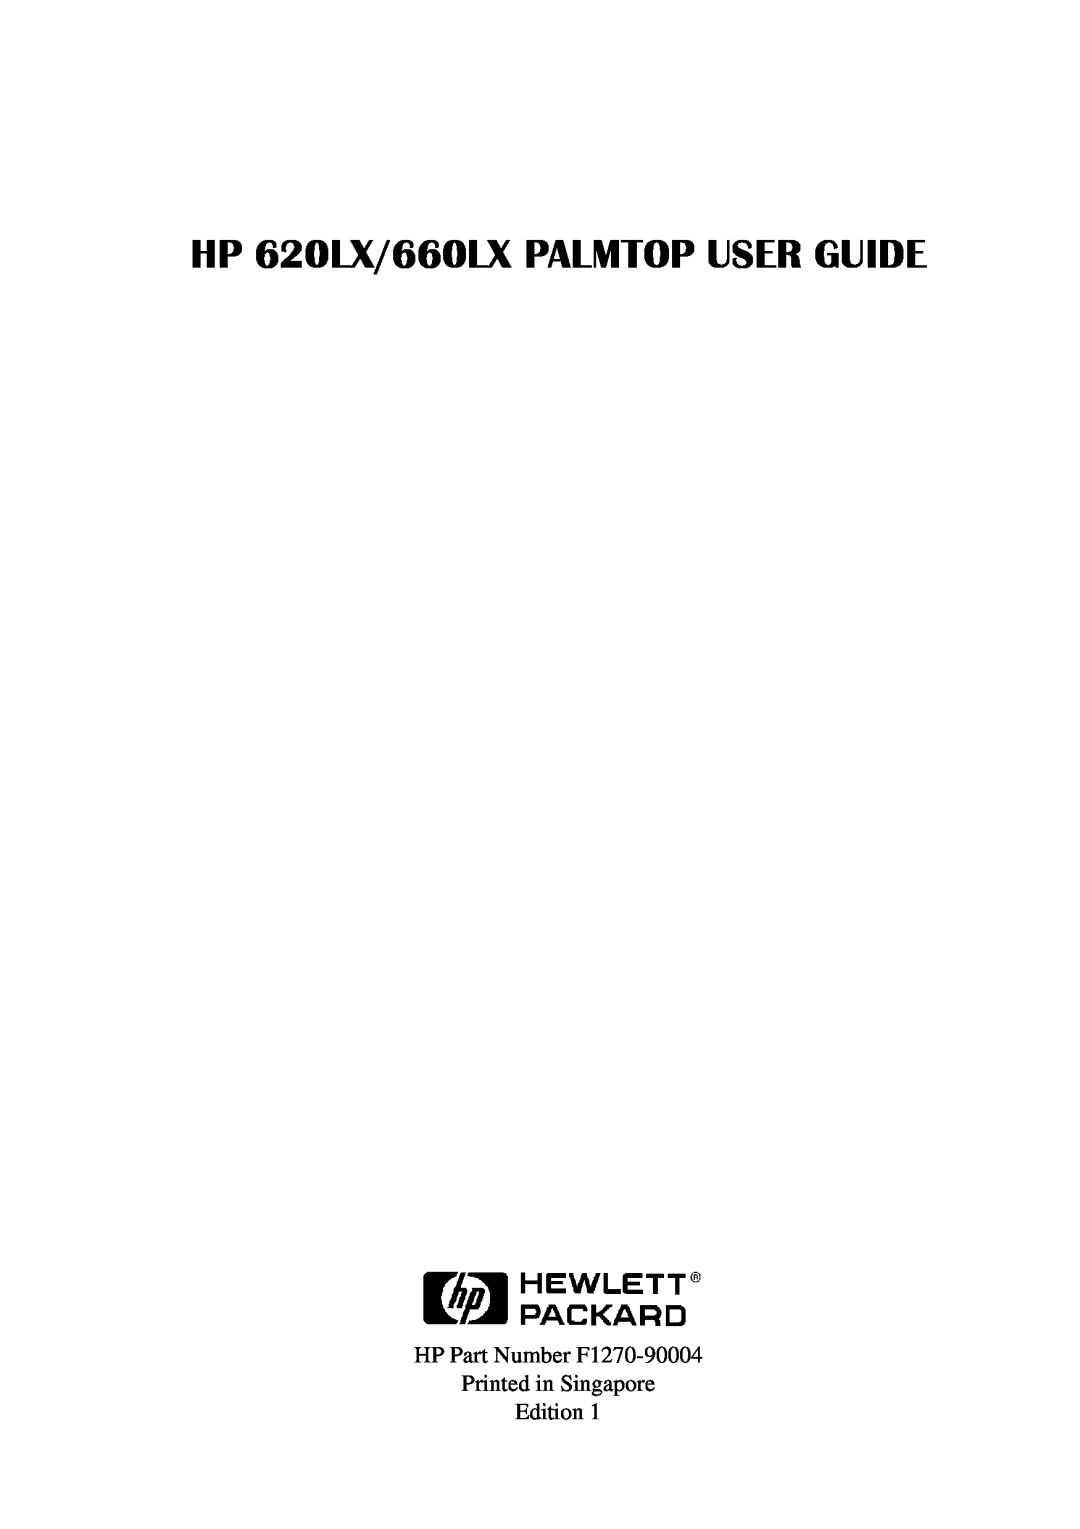 HP Palmtop 620X manual HP 620LX/660LX PALMTOP USER GUIDE, HP Part Number F1270-90004 Printed in Singapore Edition 